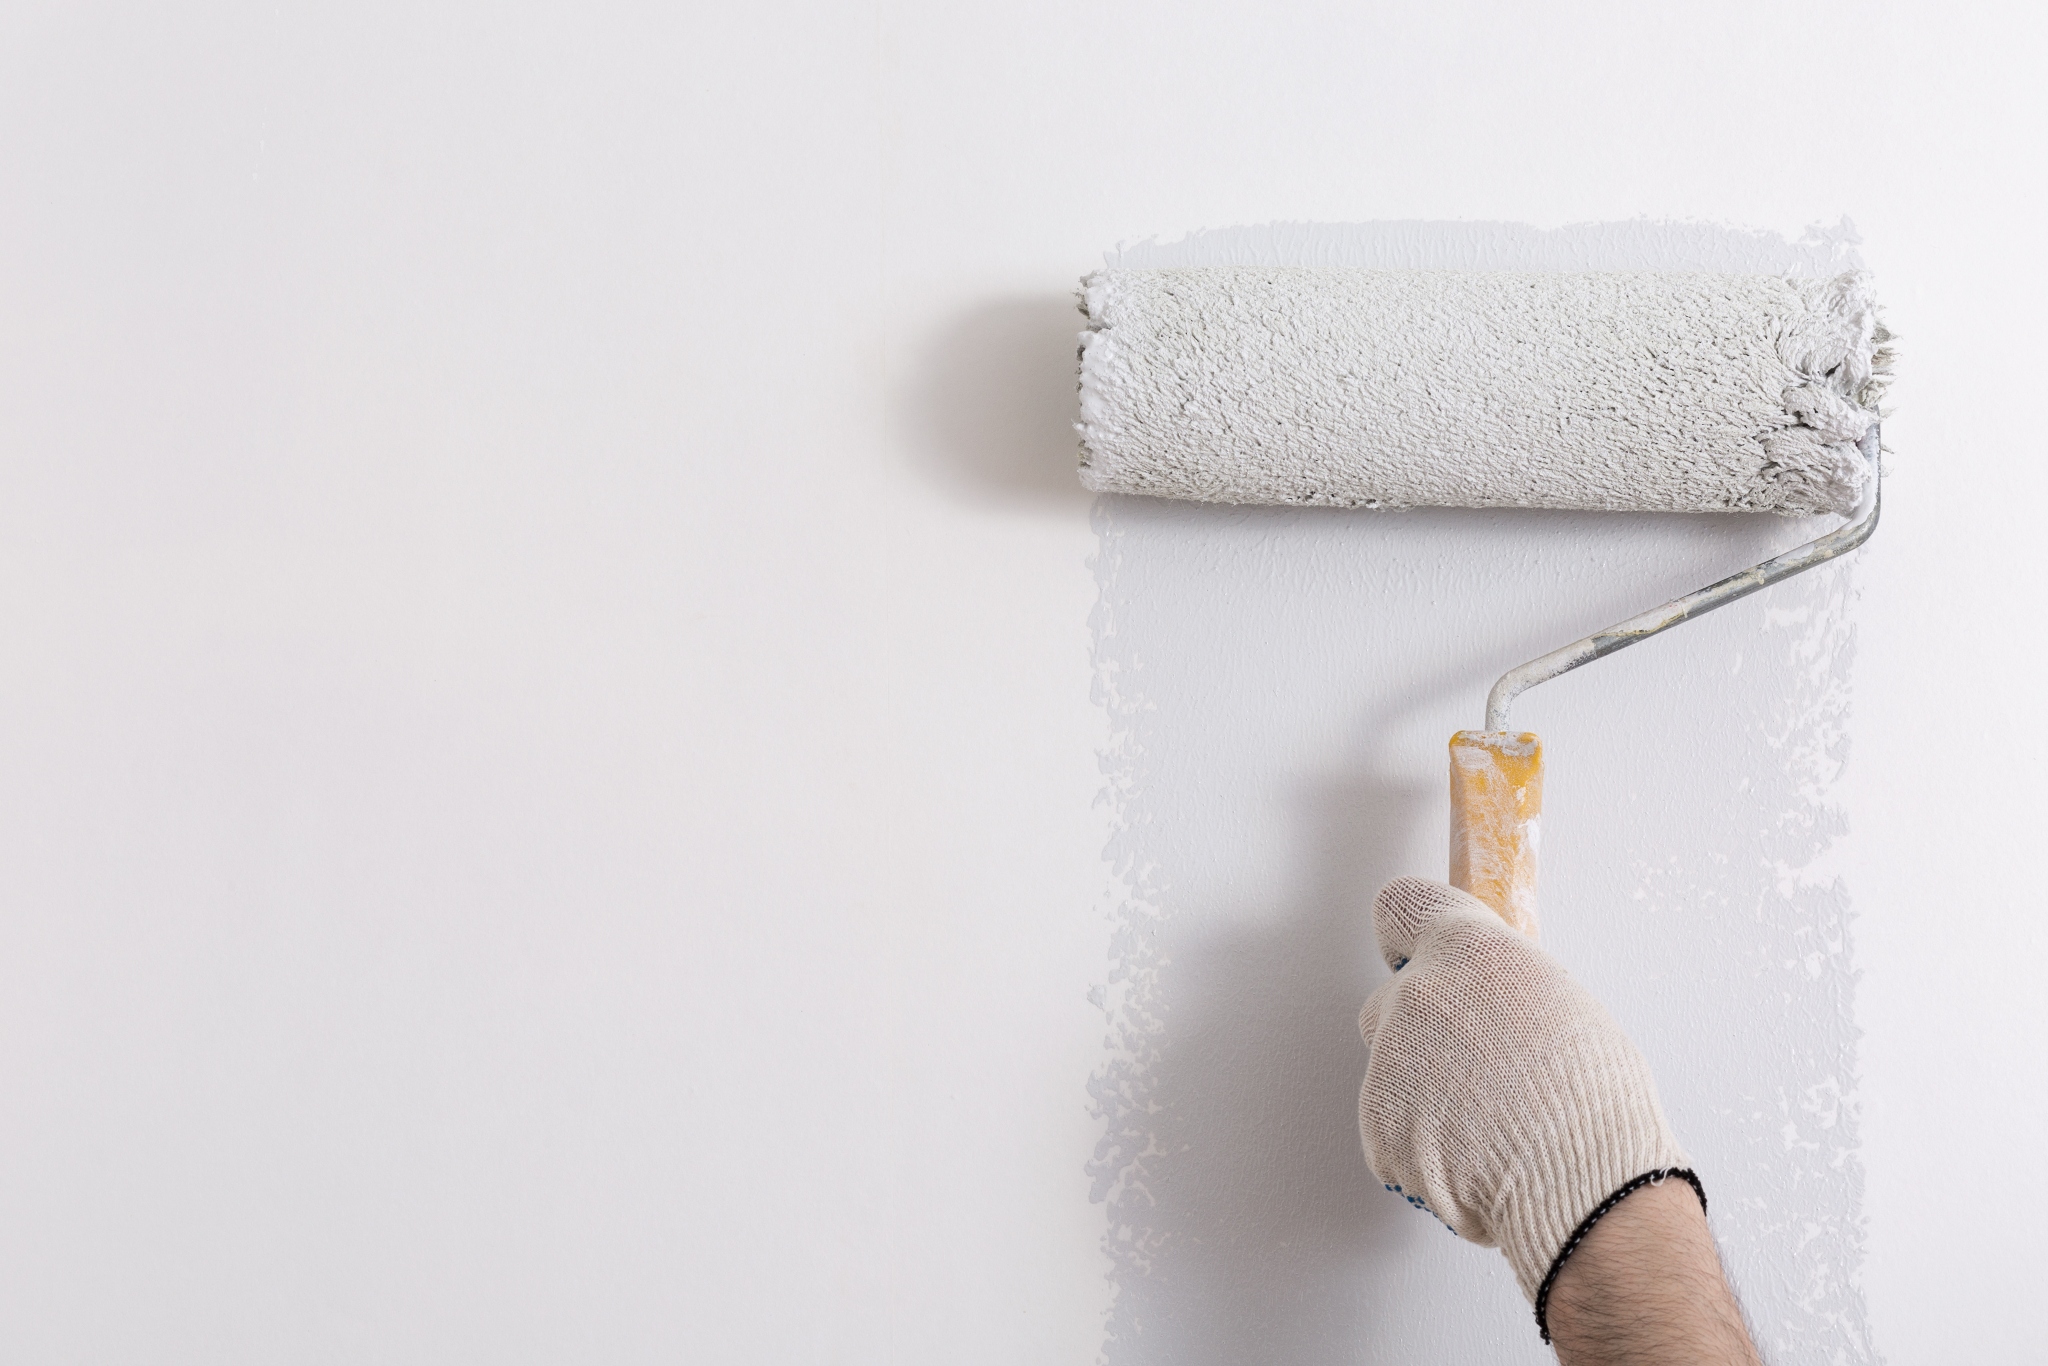 Some usign a paint roller to apply low VOC paint to a hotel bathroom.